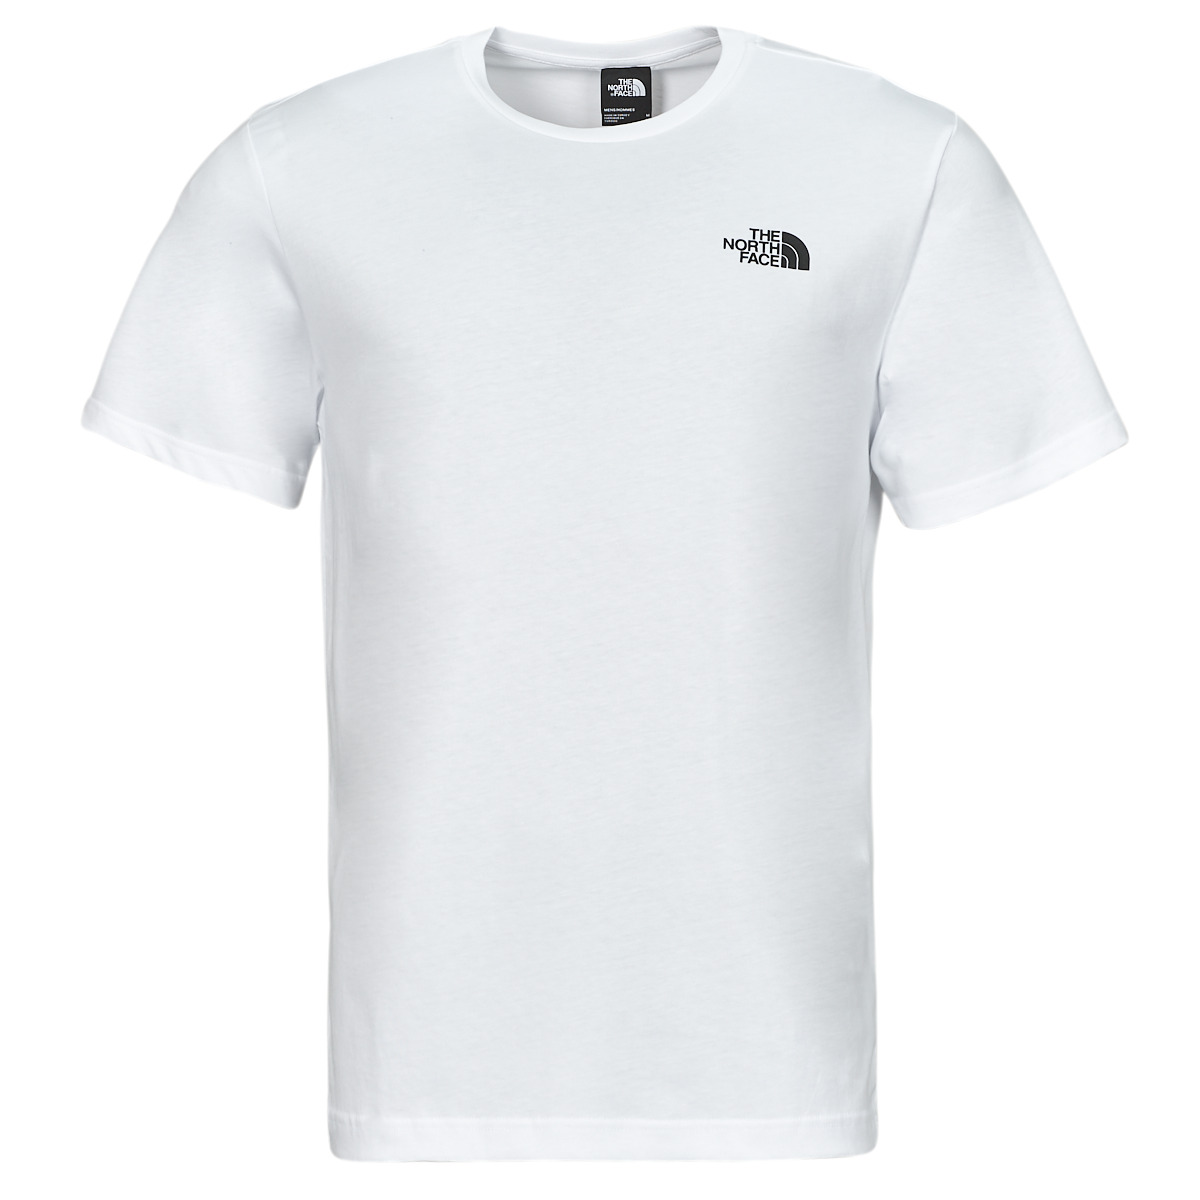 Clothing Men short-sleeved t-shirts The North Face REDBOX White